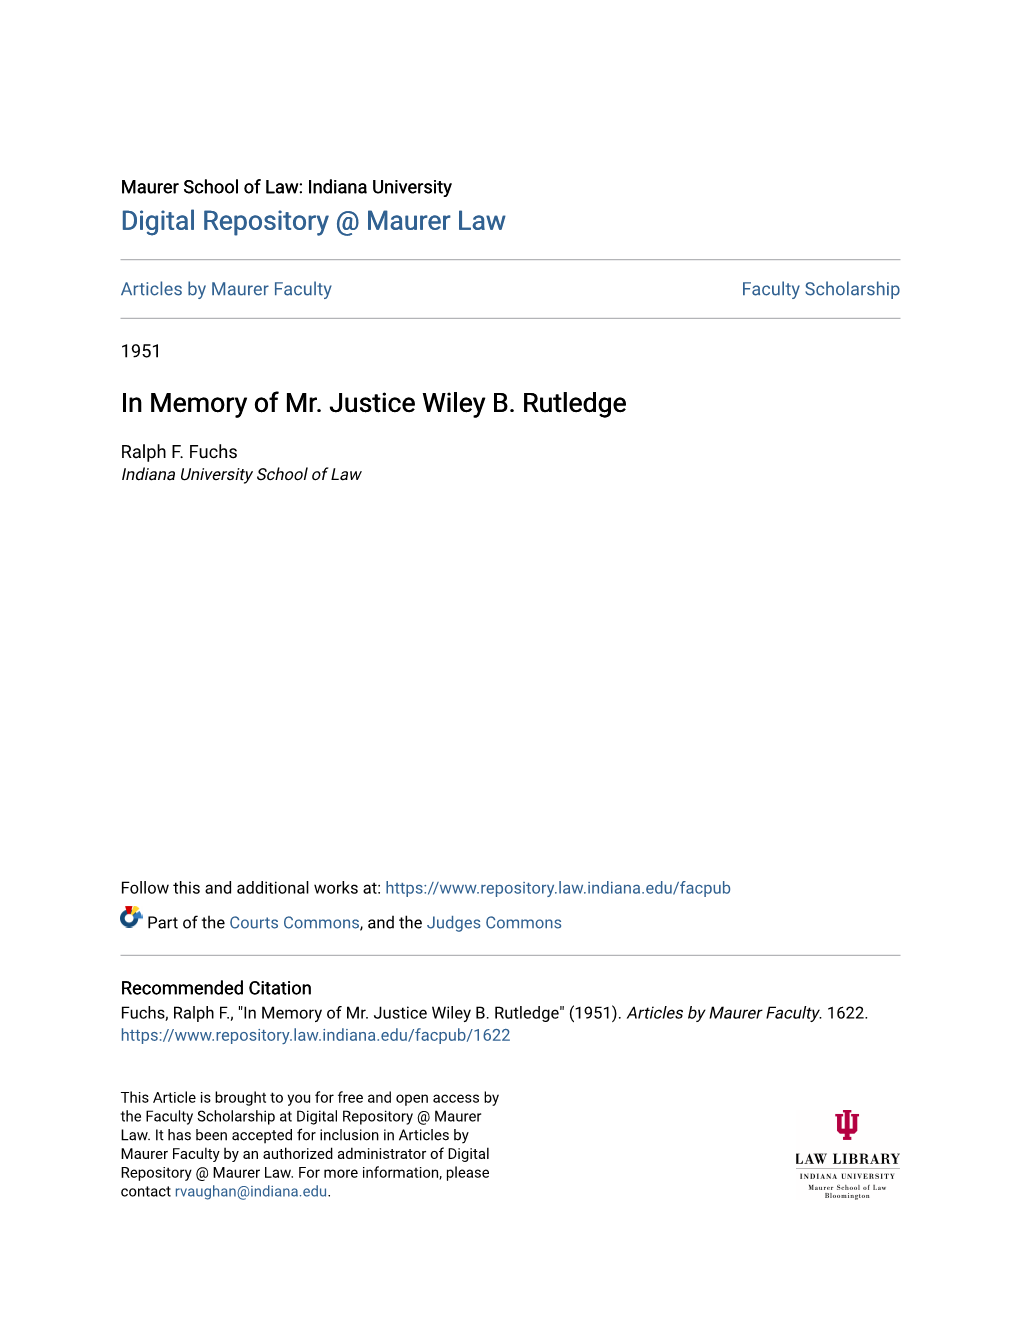 In Memory of Mr. Justice Wiley B. Rutledge